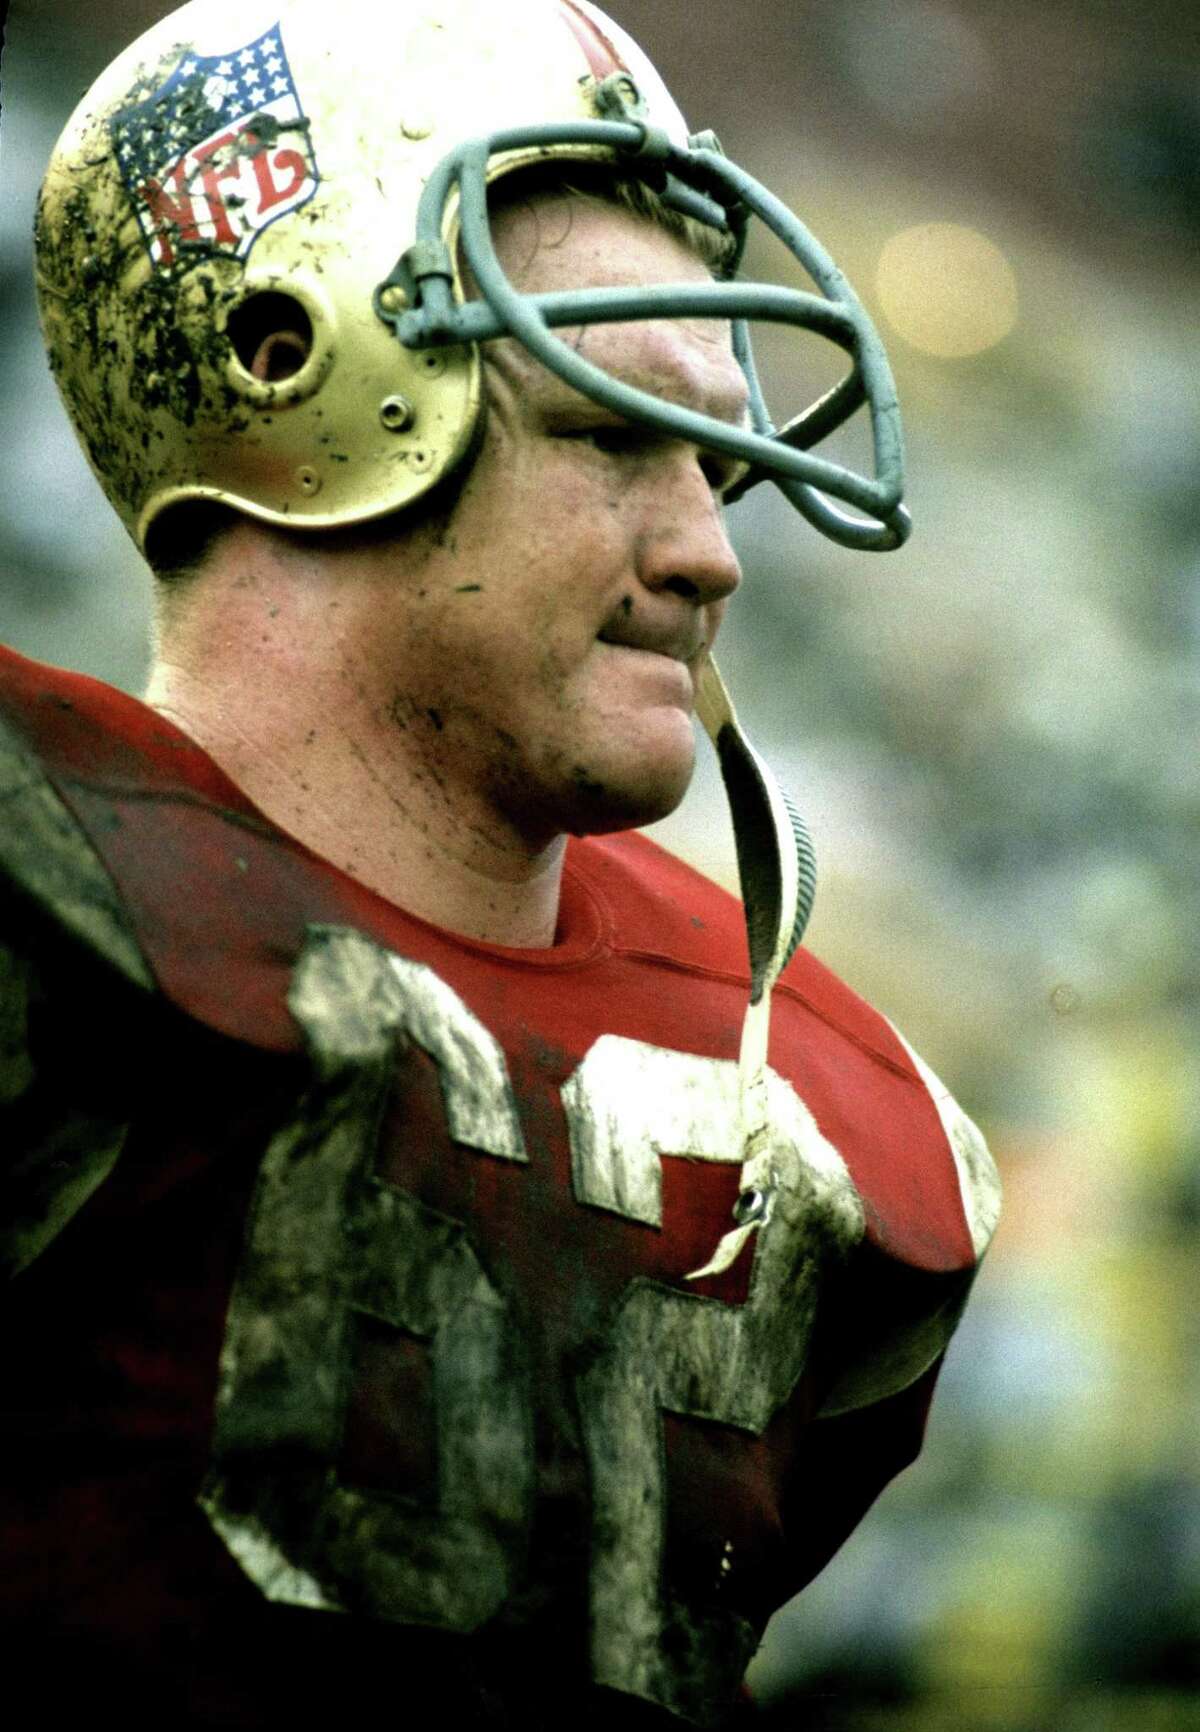 Atlanta Falcons linebacker Tommy Nobis during a 1967 Pro Bowl game where the East beat the West 20-10 on January 22, 1967 at the Los Angeles Memorial Coliseum in Los Angeles, California. 1967 NFL Pro Bowl East vs West - January 22, 1967 (AP Photo/NFL Photos)